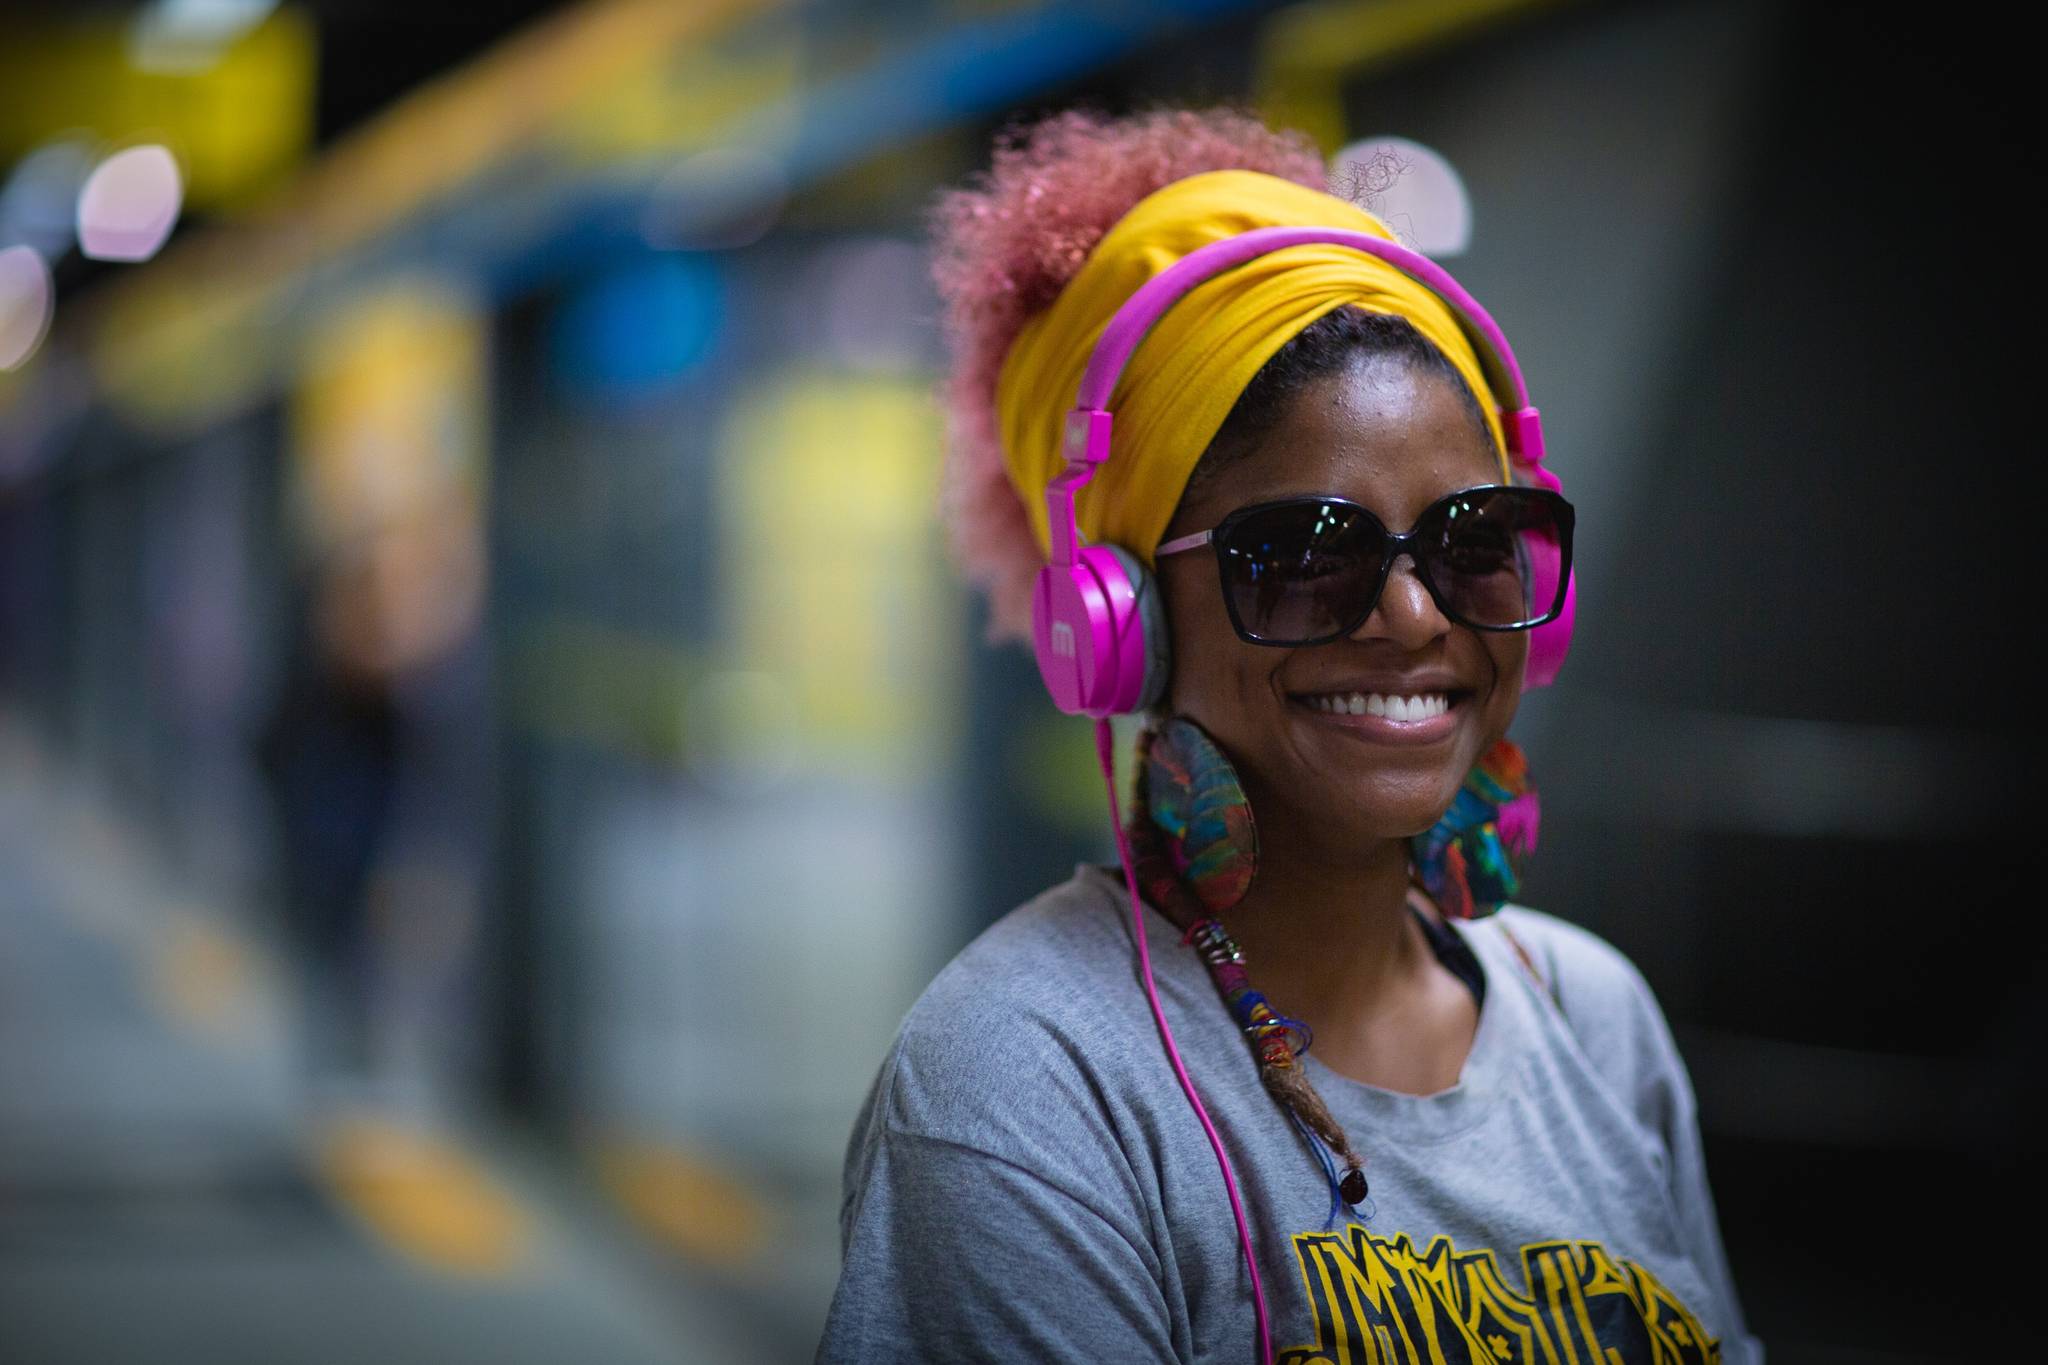 Spotify’s Wrapped campaign showcases love of podcasts